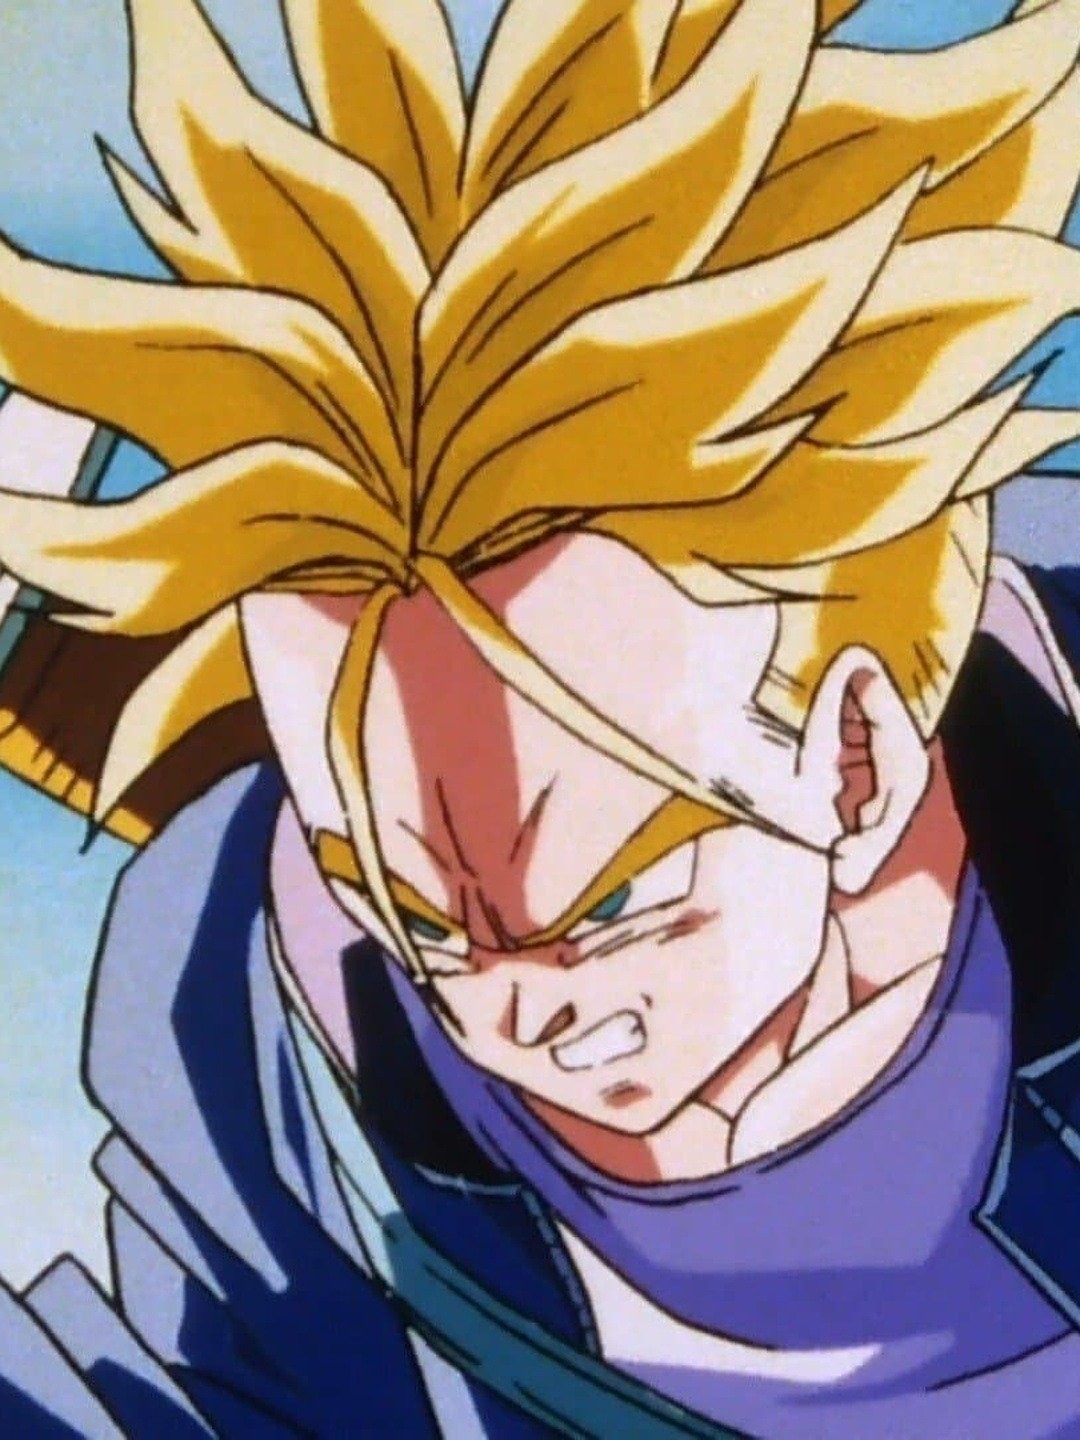 Dragon Ball Z Special 2: The History of Trunks (1993) - Filmaffinity